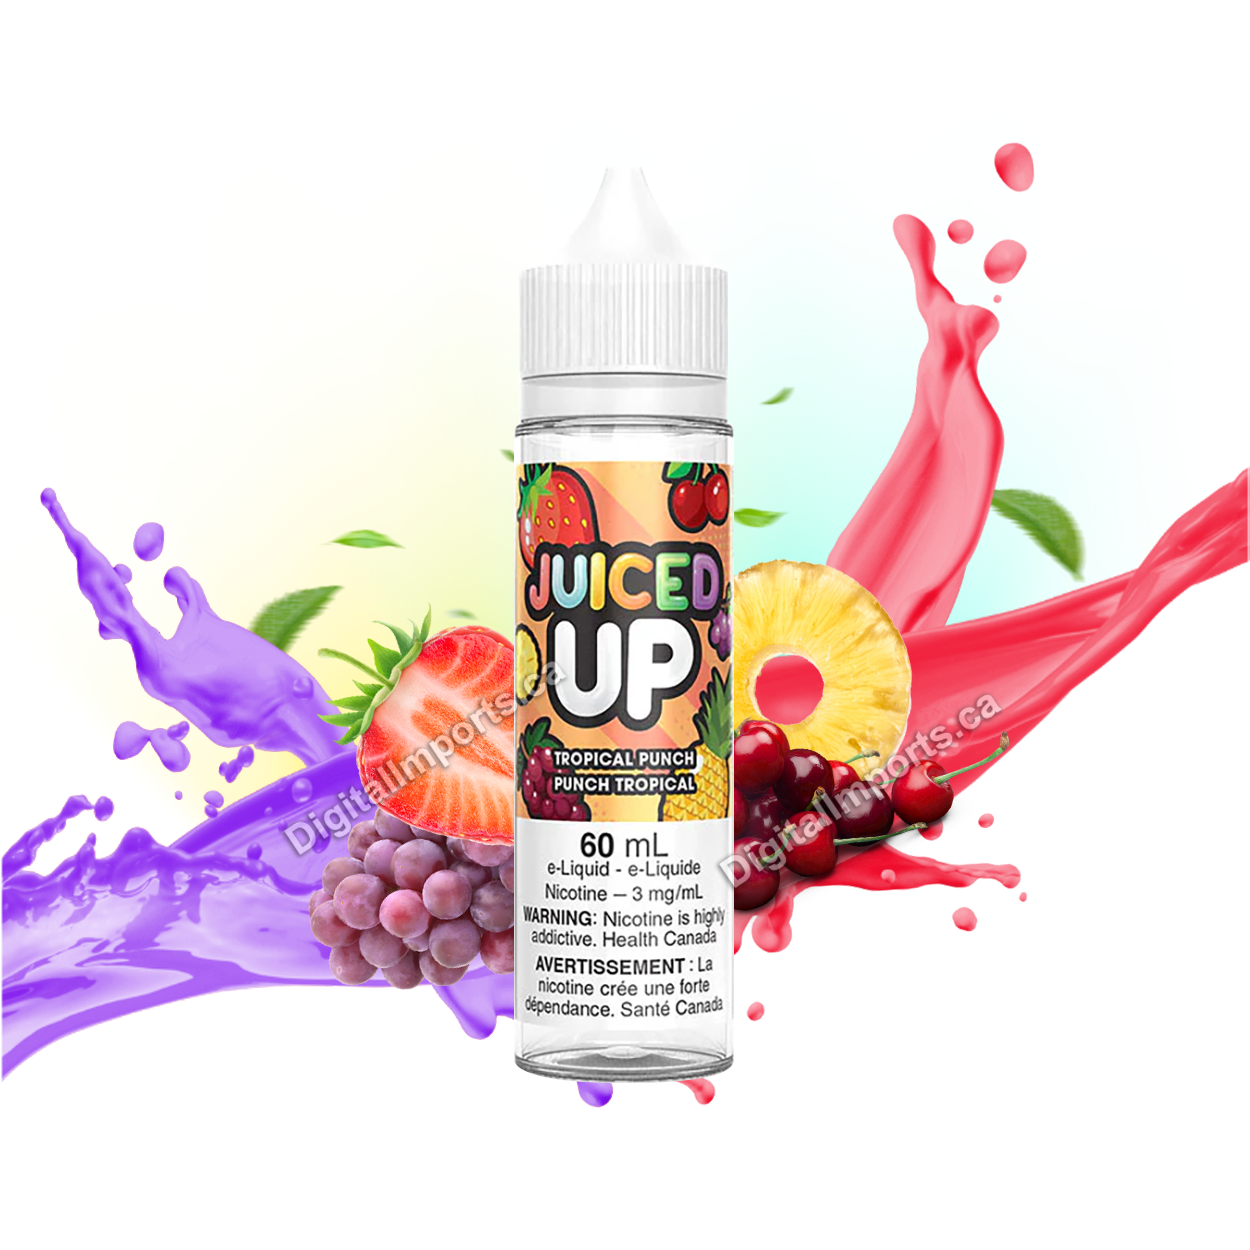 JUICED UP - TROPICAL PUNCH